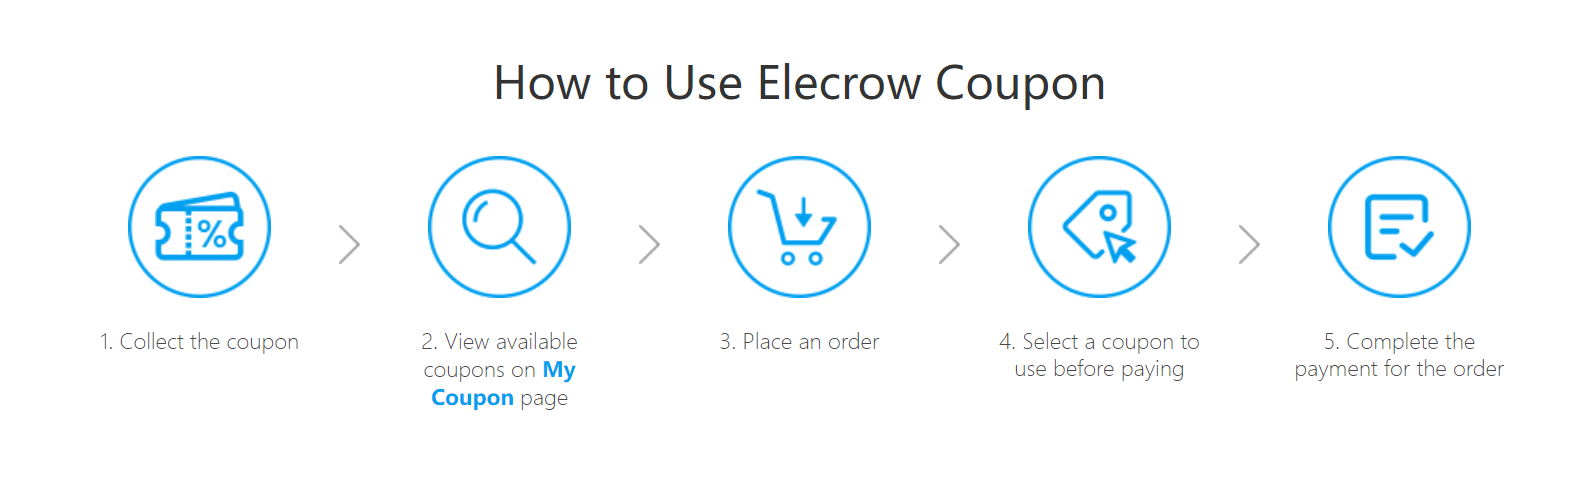 How to Use Elecrow Coupon